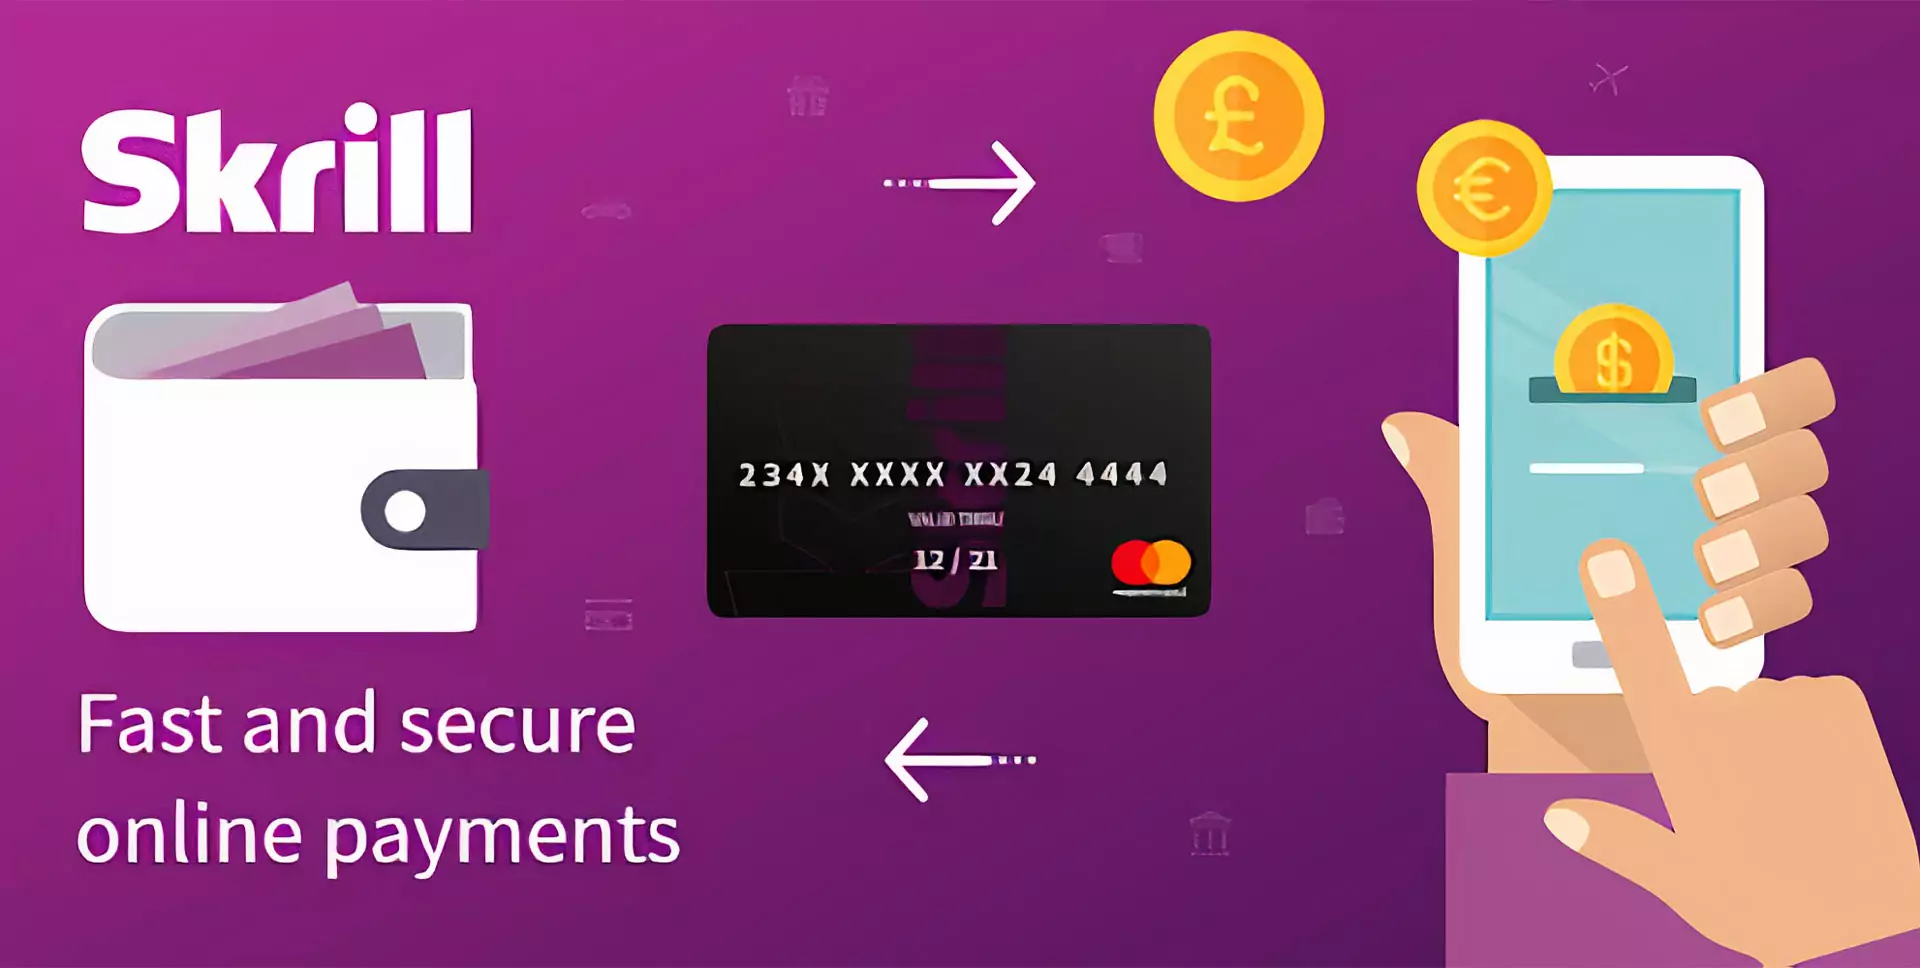 You can transfer money from other e-wallets or Indian banks and deposit via Skrill.